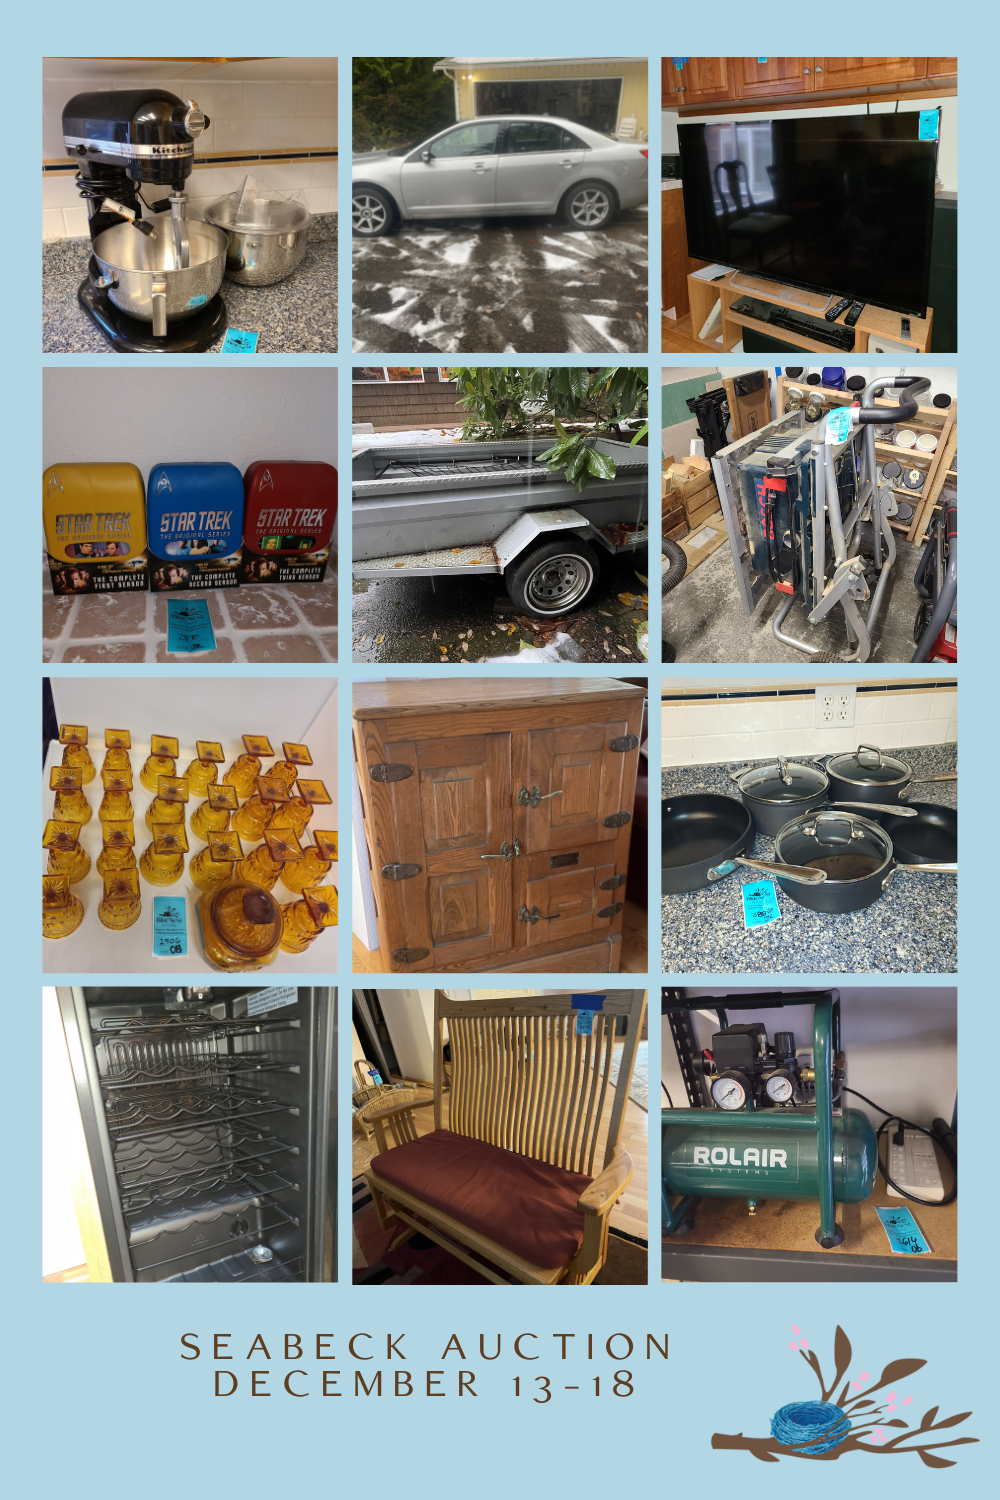 Online estate sale from blue nest home featuring a Lincoln MKZ and other home good items. Collage of some of the items for sale.